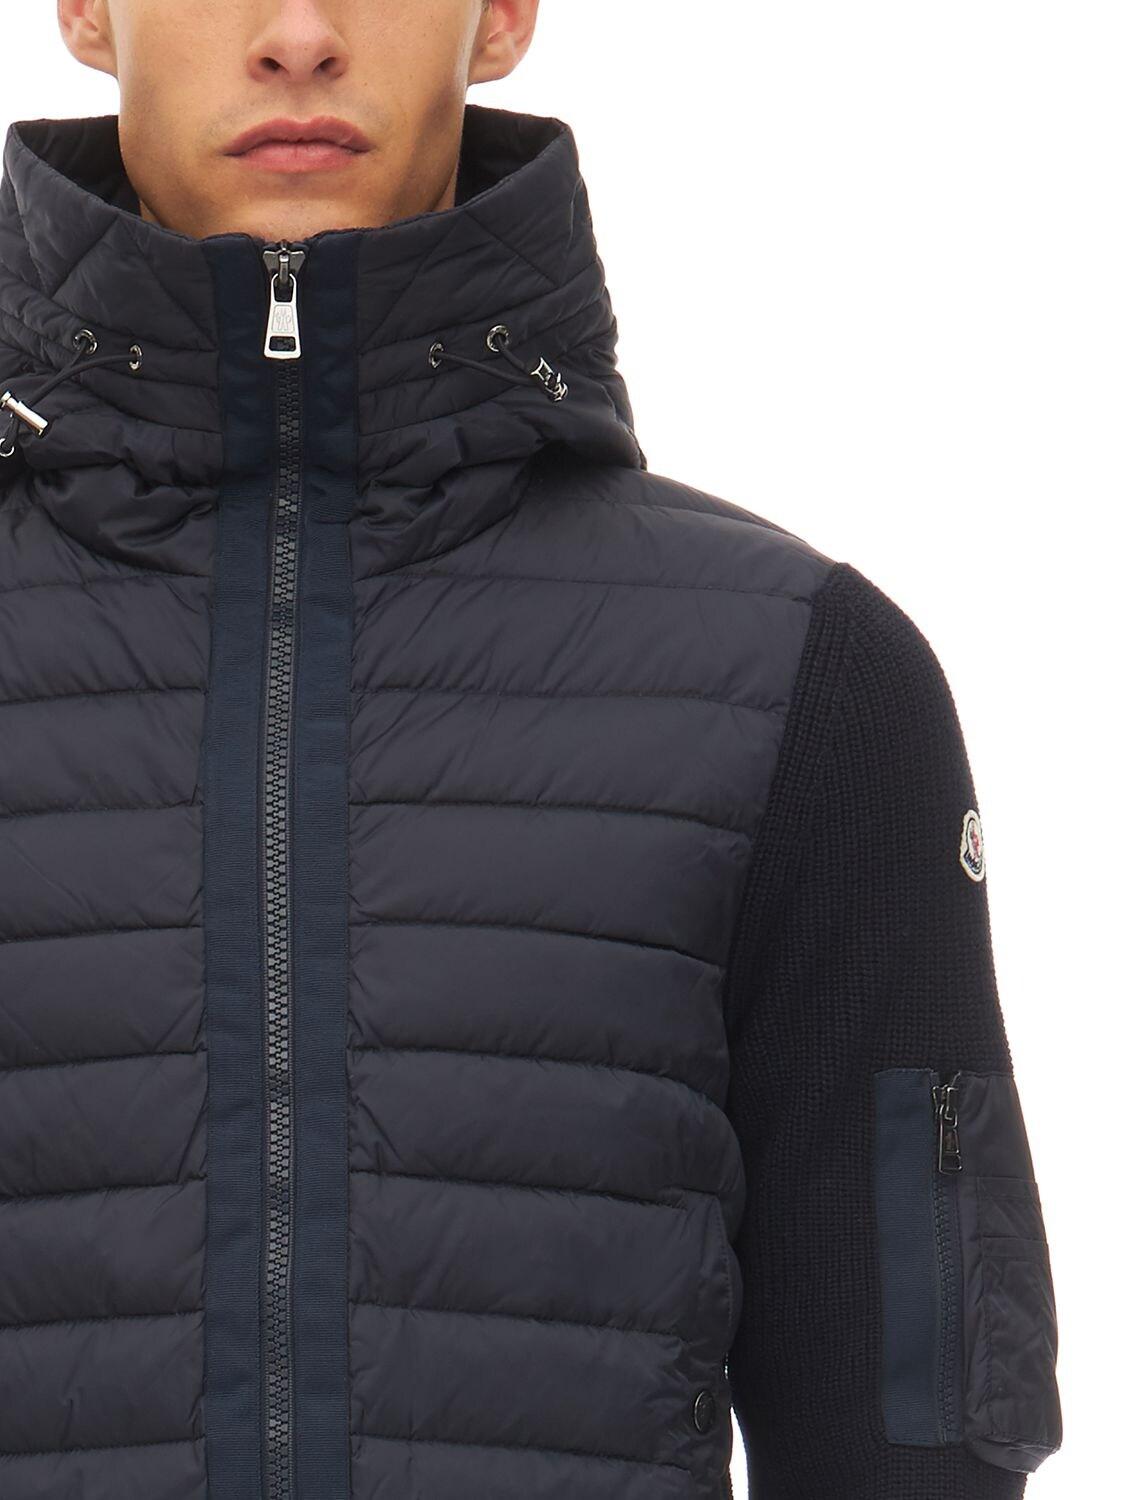 Moncler Wool Blend Tricot Down Jacket in Navy (Blue) for Men - Lyst